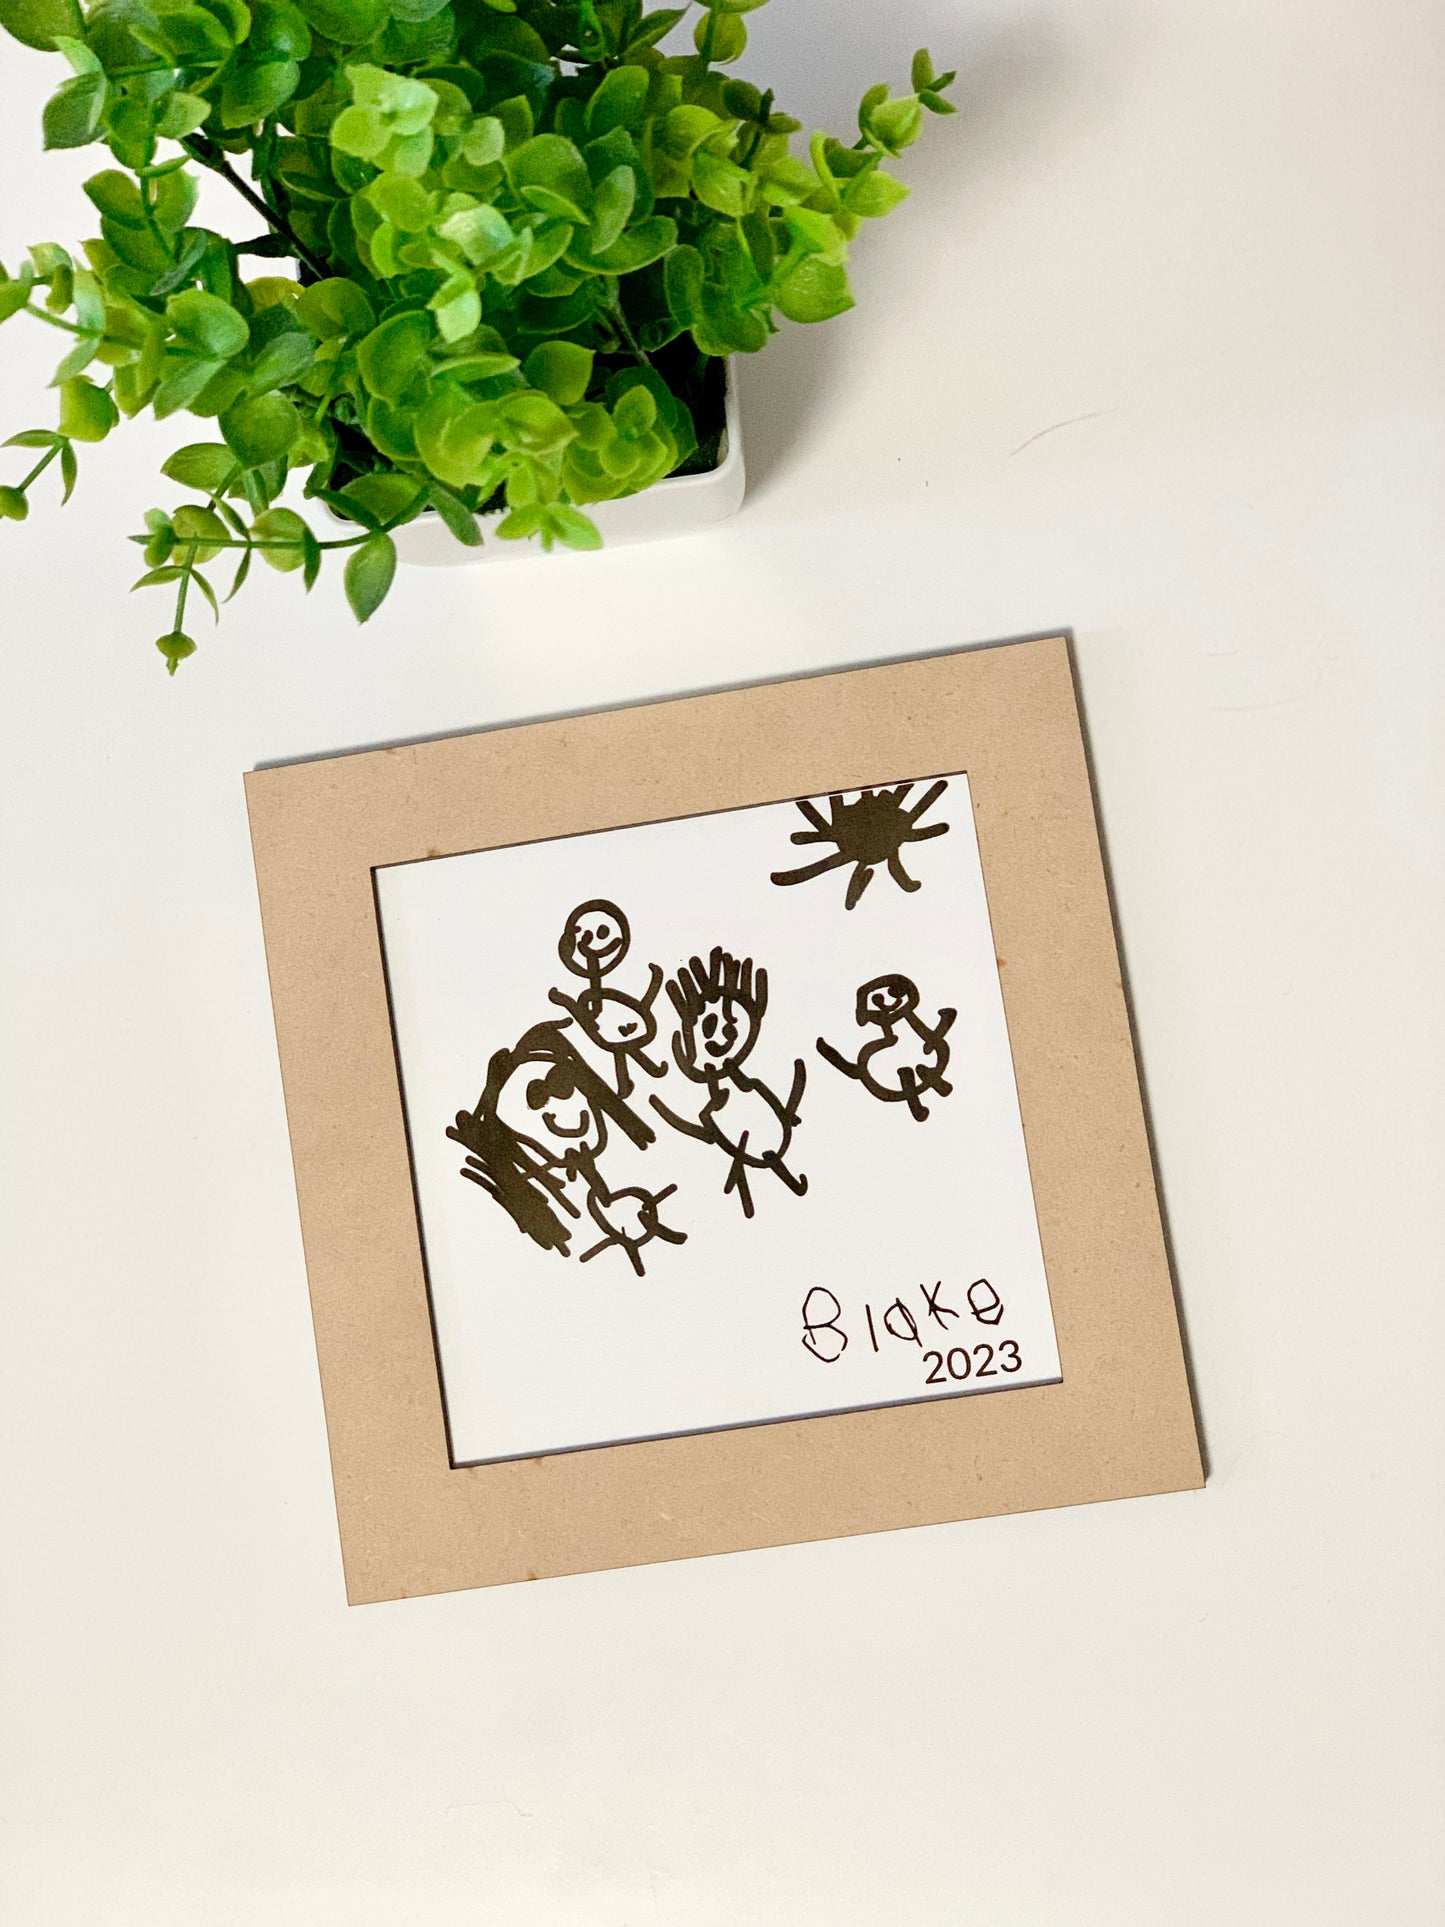 Child’s Drawing Traced into a Framed Picture